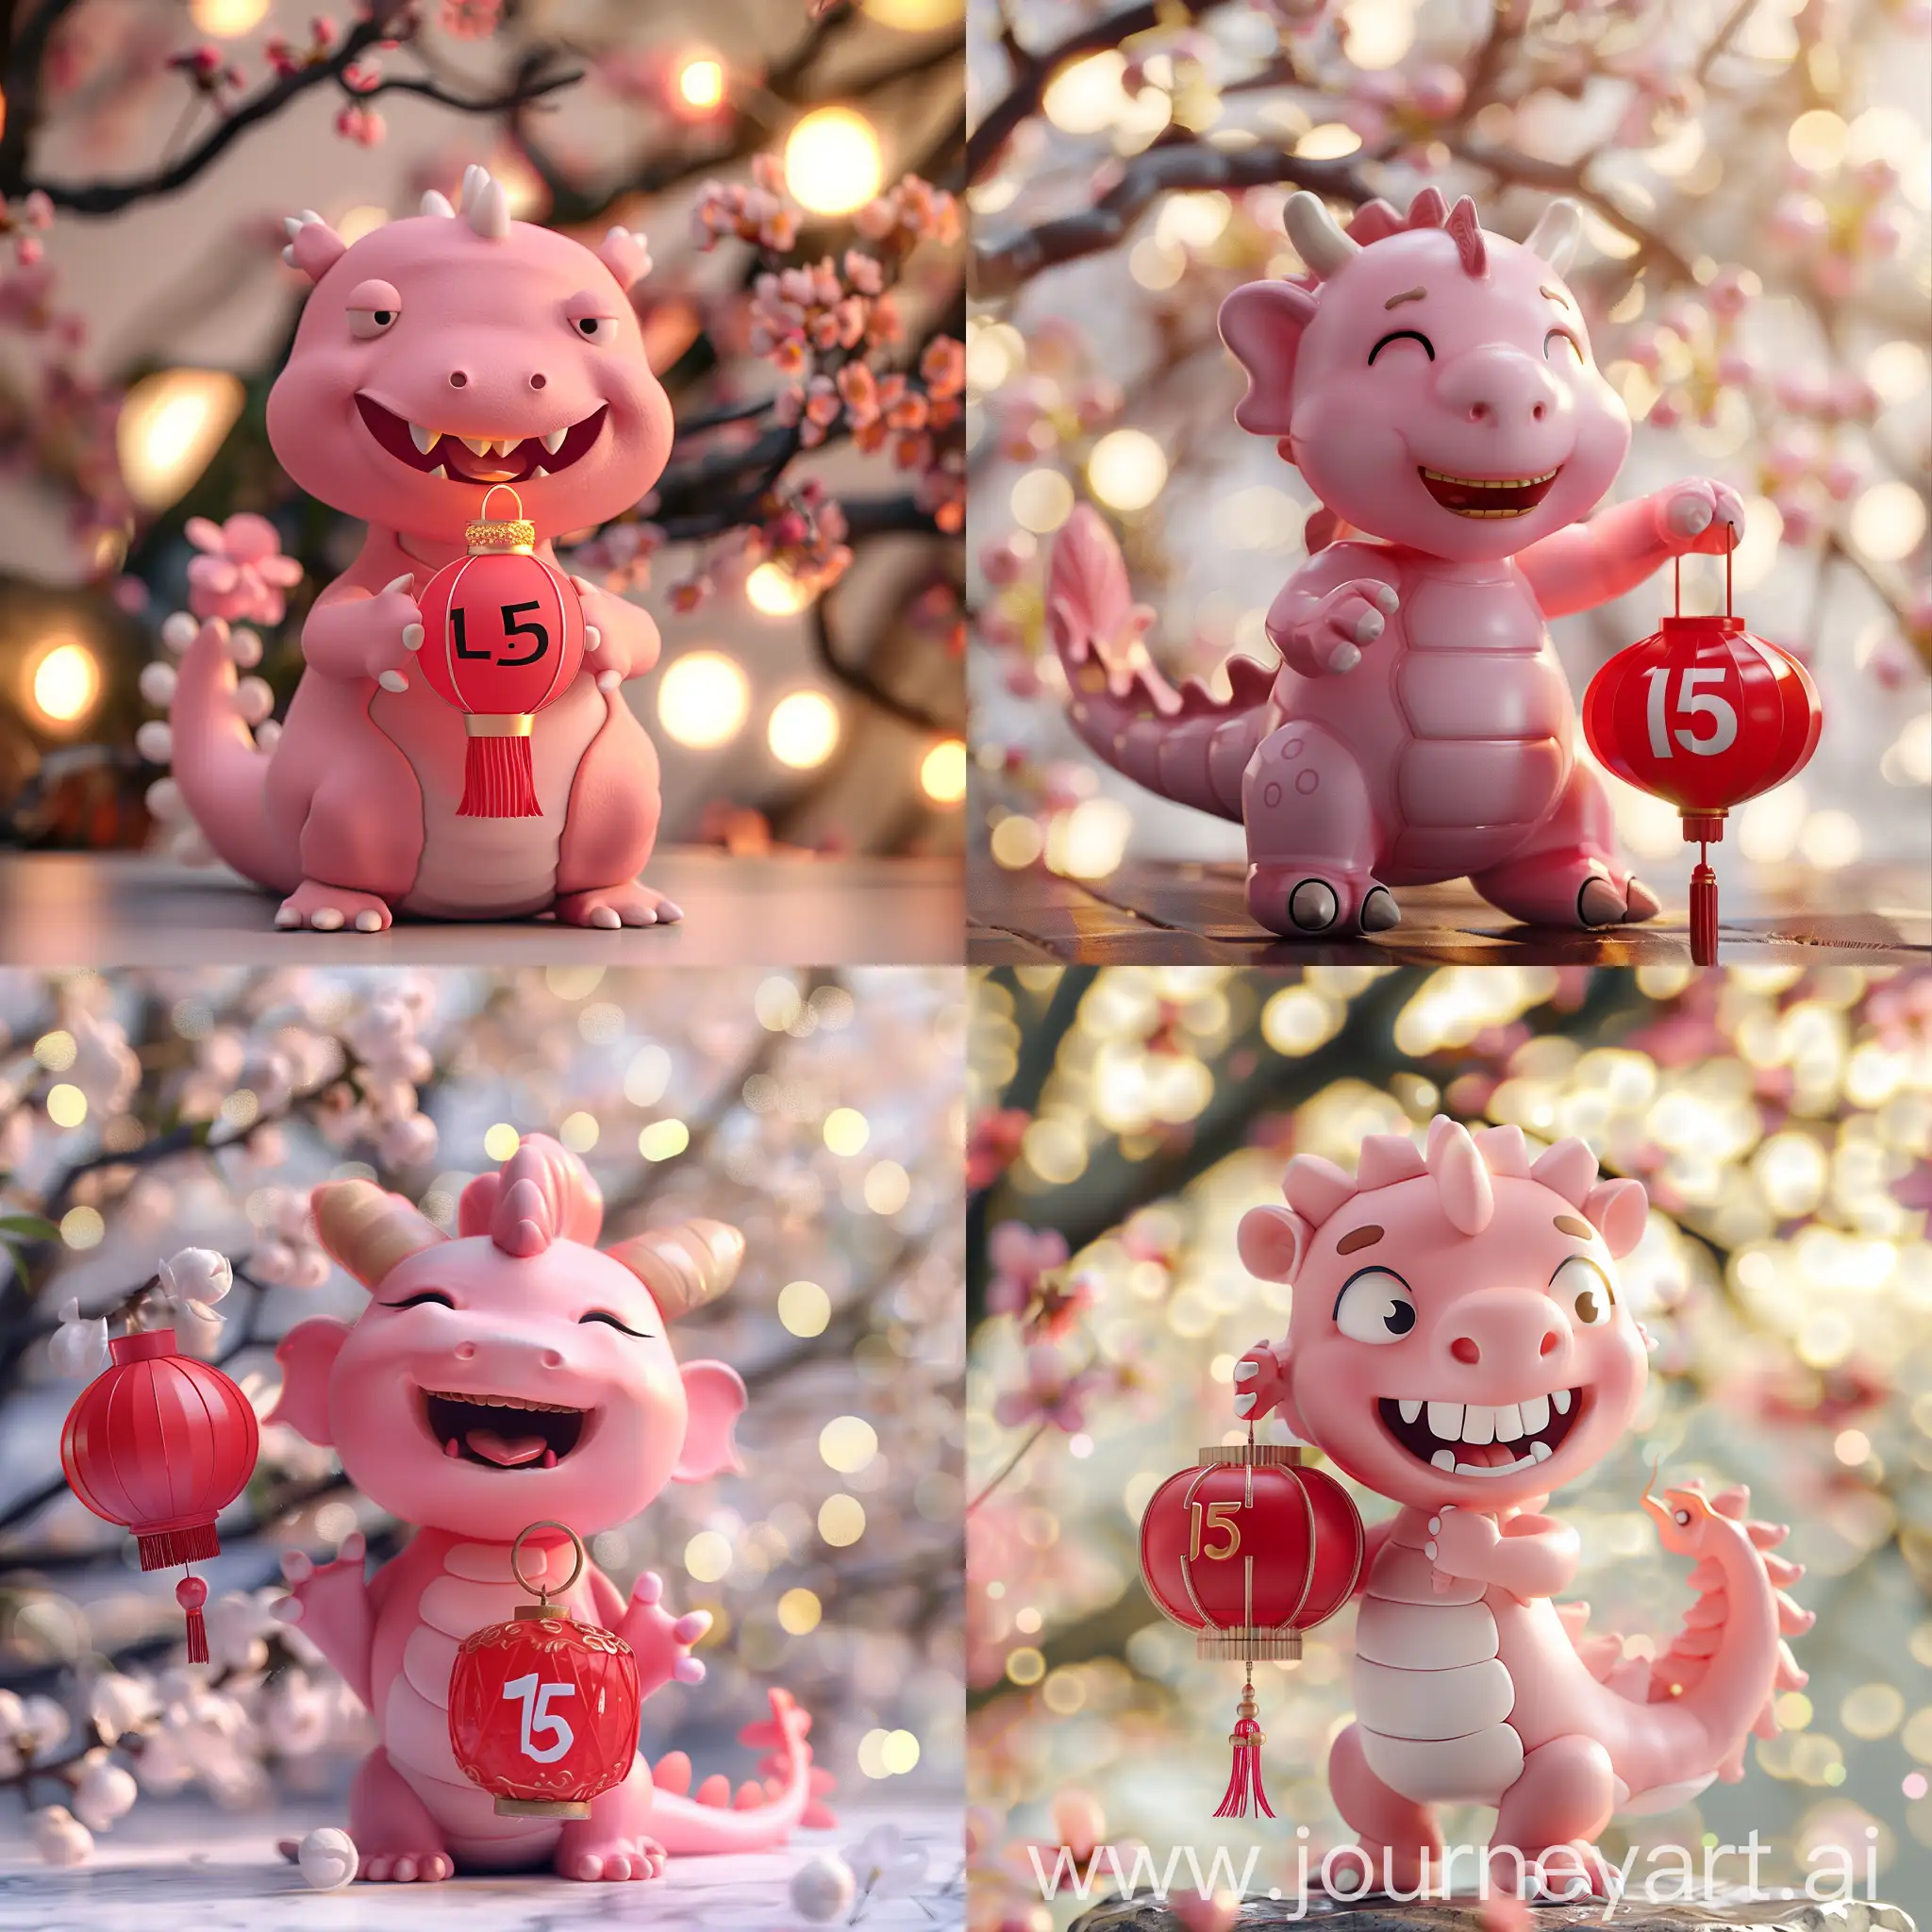 Cute pink 3d Chinese kid dragon with benign smile. Holds red Chinese lantern with number "15". Background spring blossoms bokeh